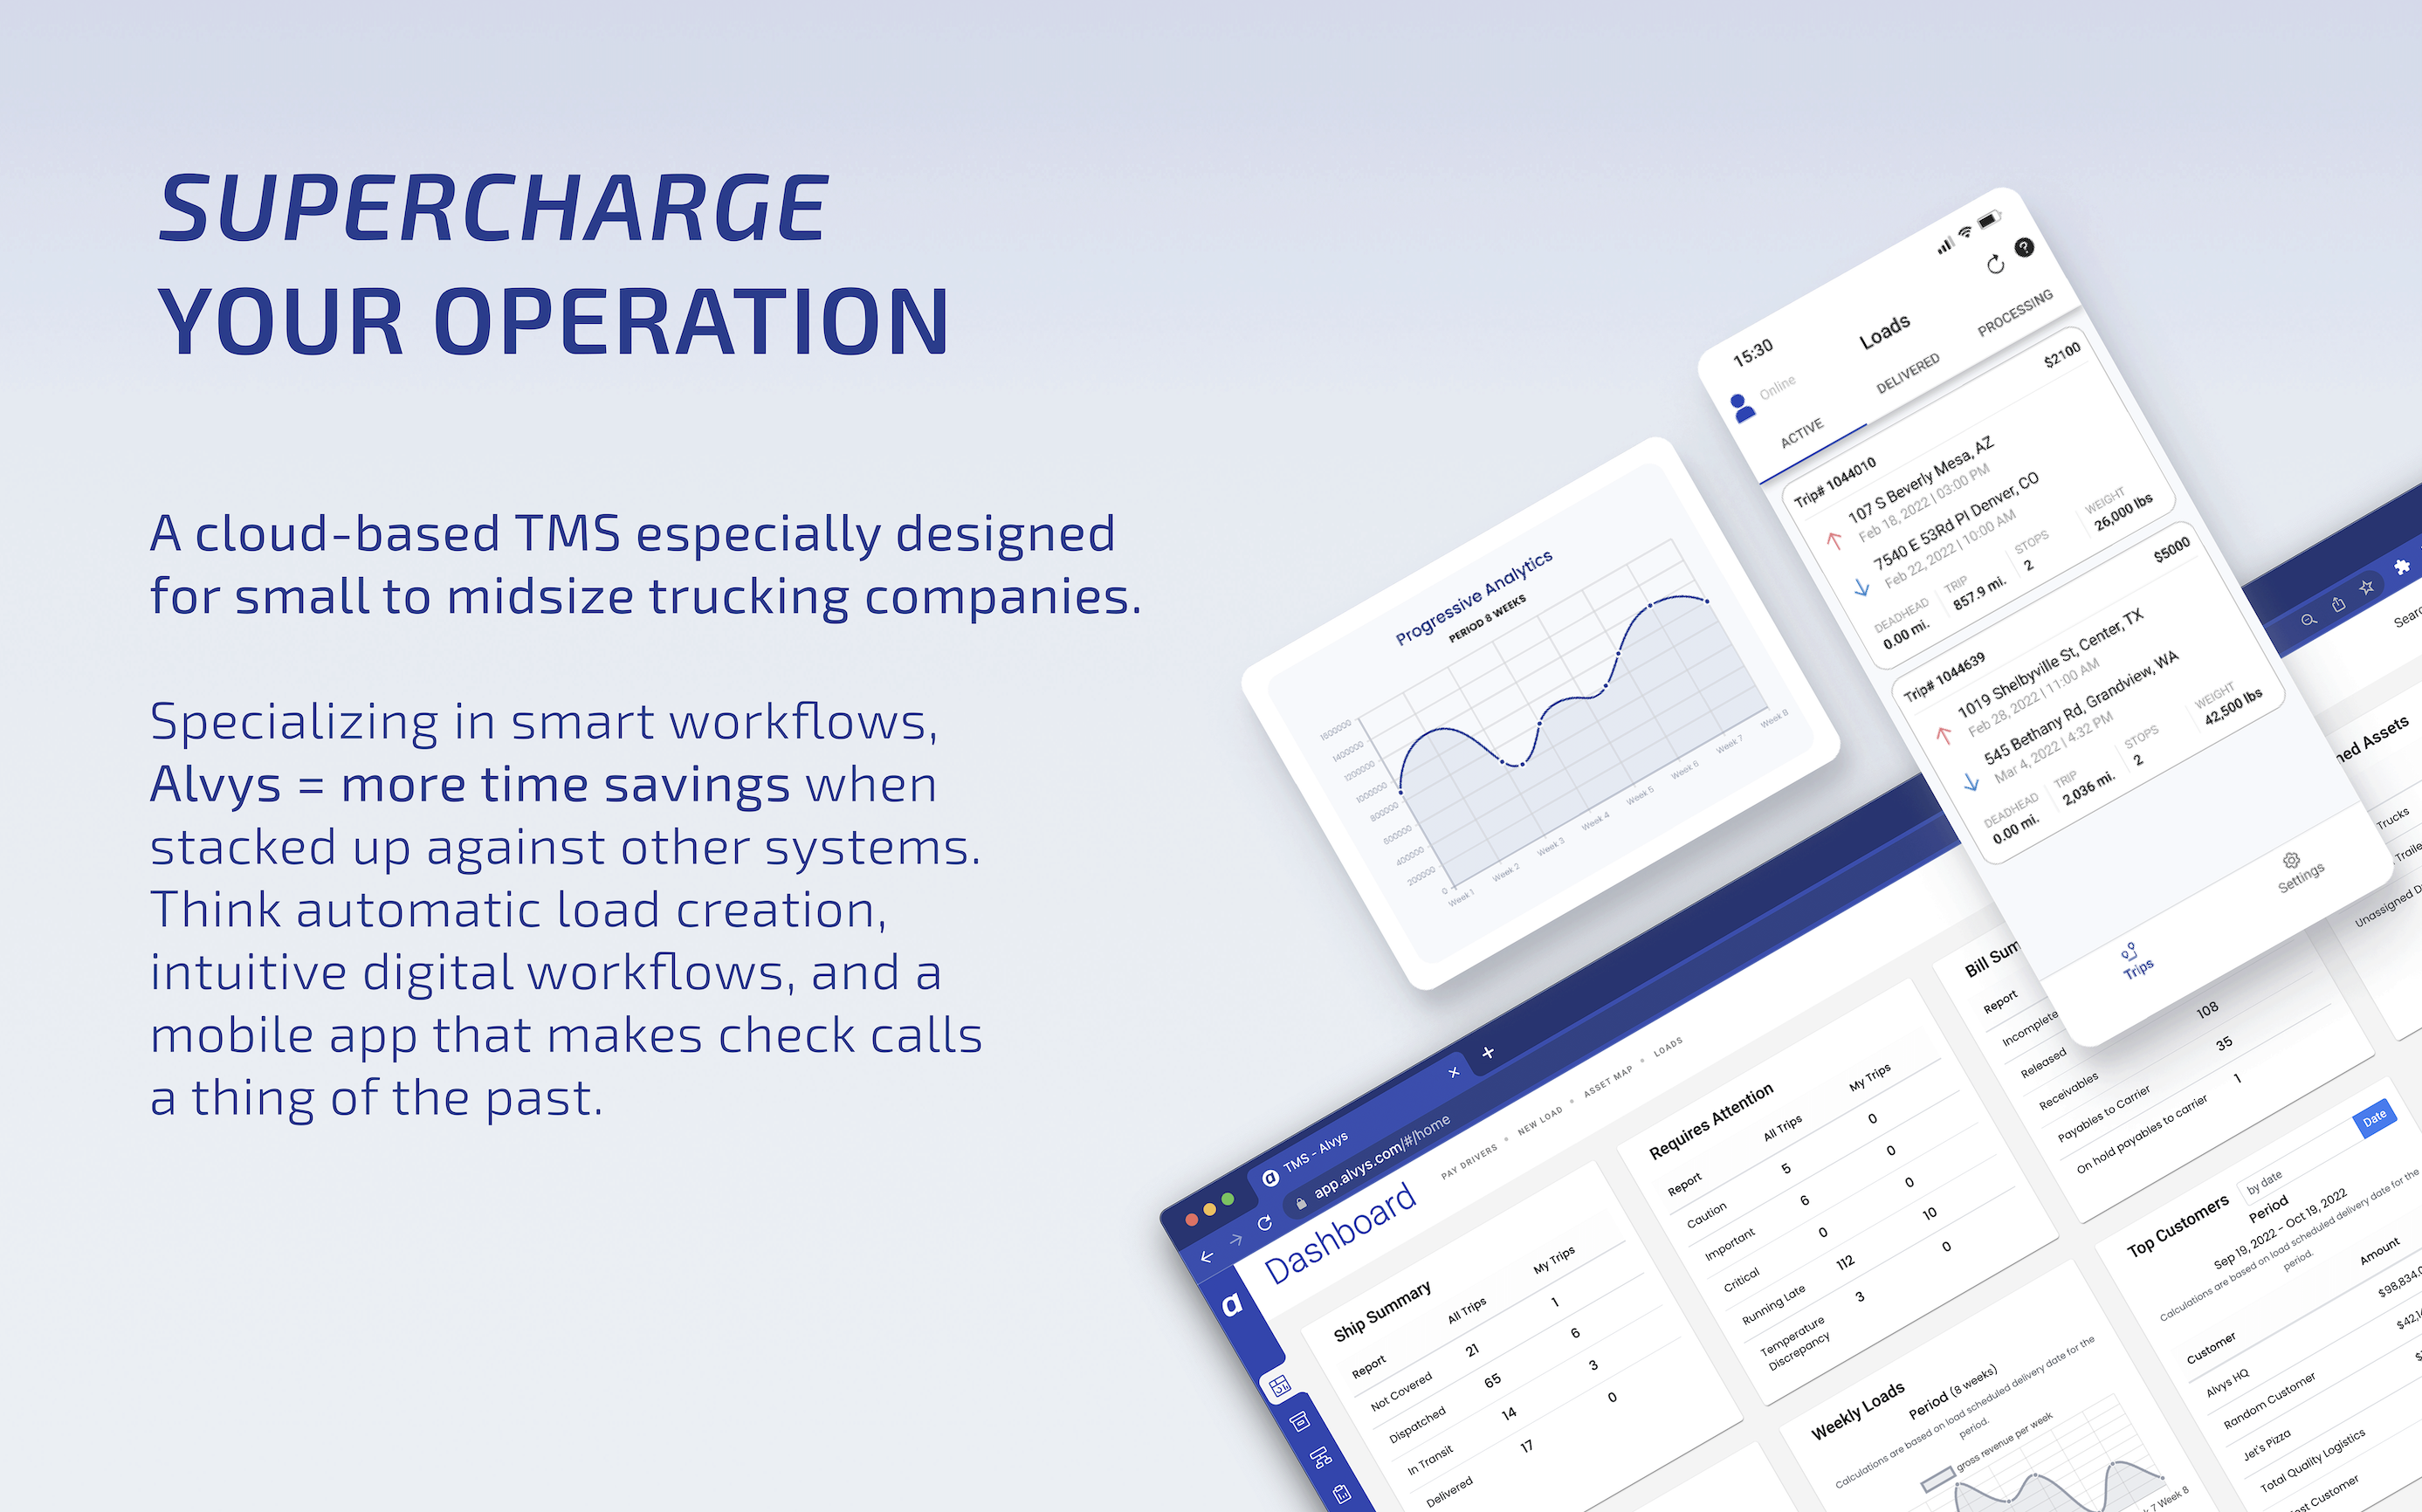 A cloud-based TMS especially designed for small to midsize trucking companies. Specializing in smart workflows, Alvys = more time savings when stacked up against other systems. Think automatic load creation, intuitive digital workflows, and a mobile app t